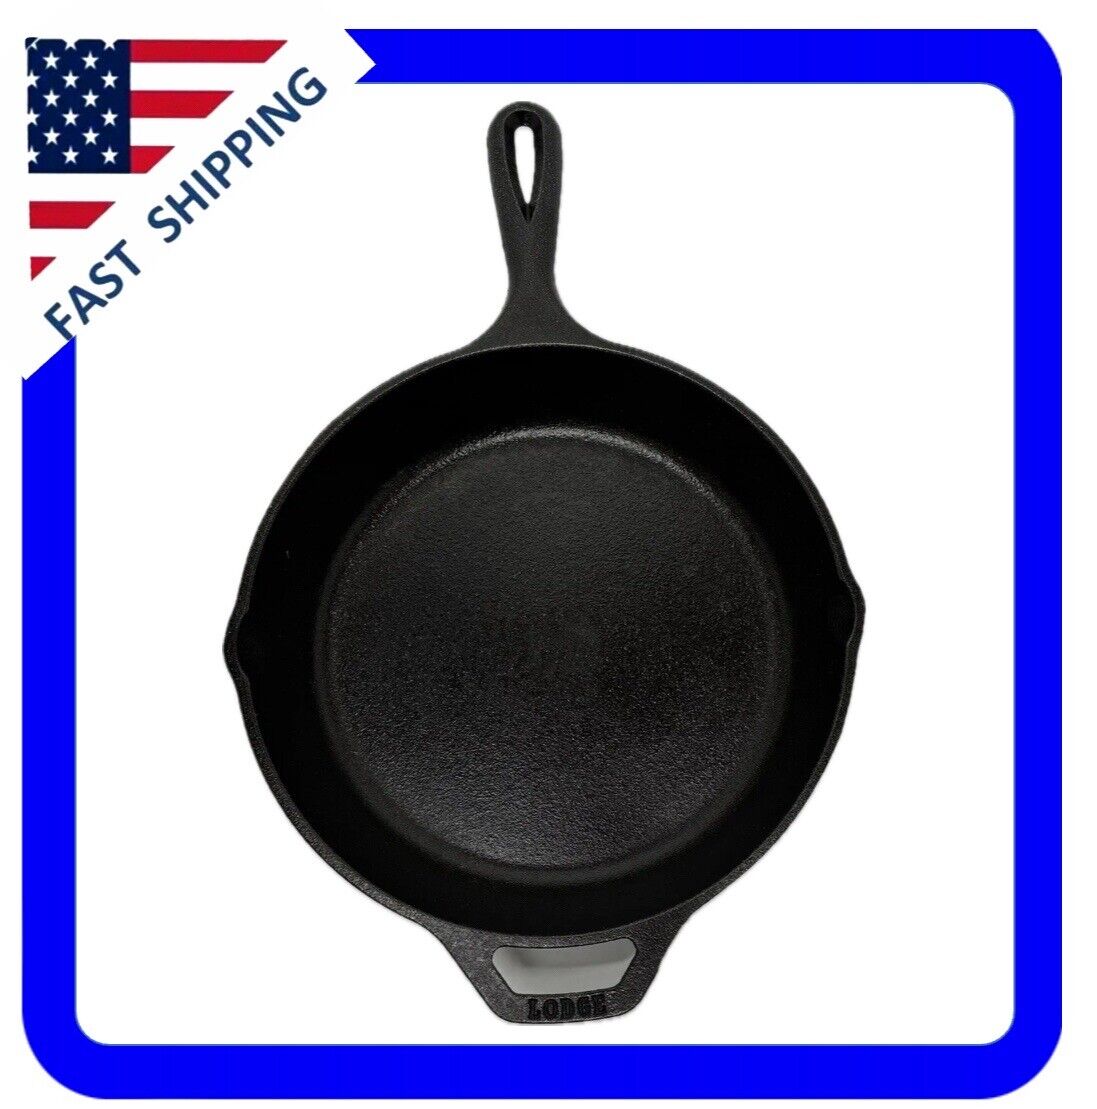 VINTAGE LODGE CAST IRON SKILLET #4 USA 8SK with heat ring 10”